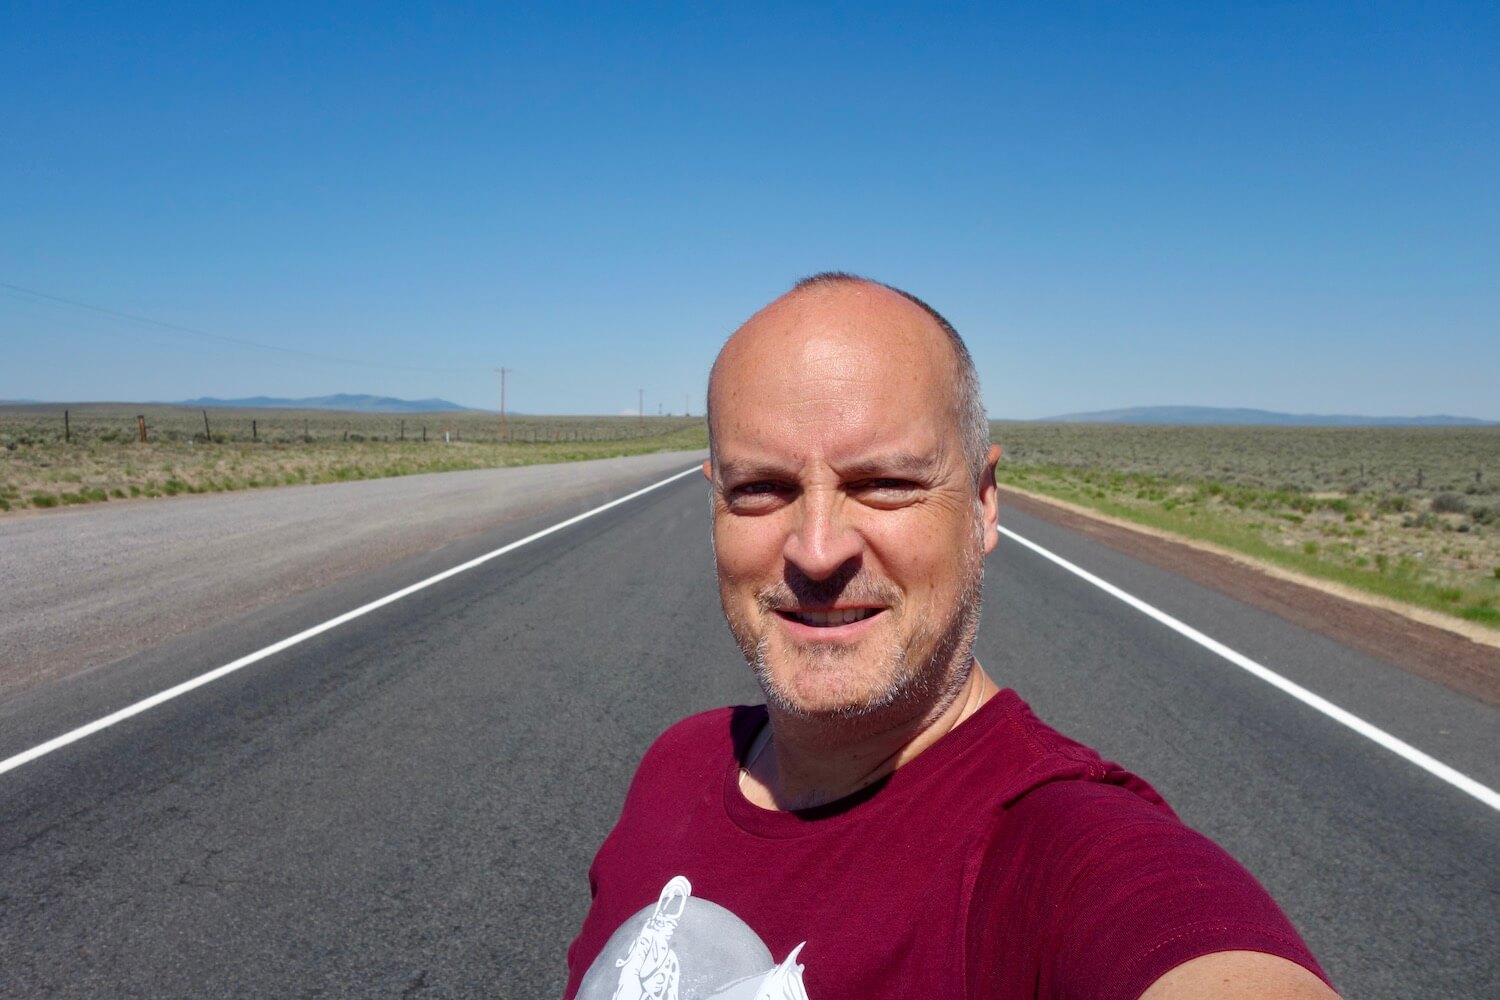 Matthew Kessi takes a selfie while on a road trip around Oregon.  He's standing in the middle of the highway and the white lines can be seen on both side.  He's wearing a red shirt and squinting a bit from the sunshine.  